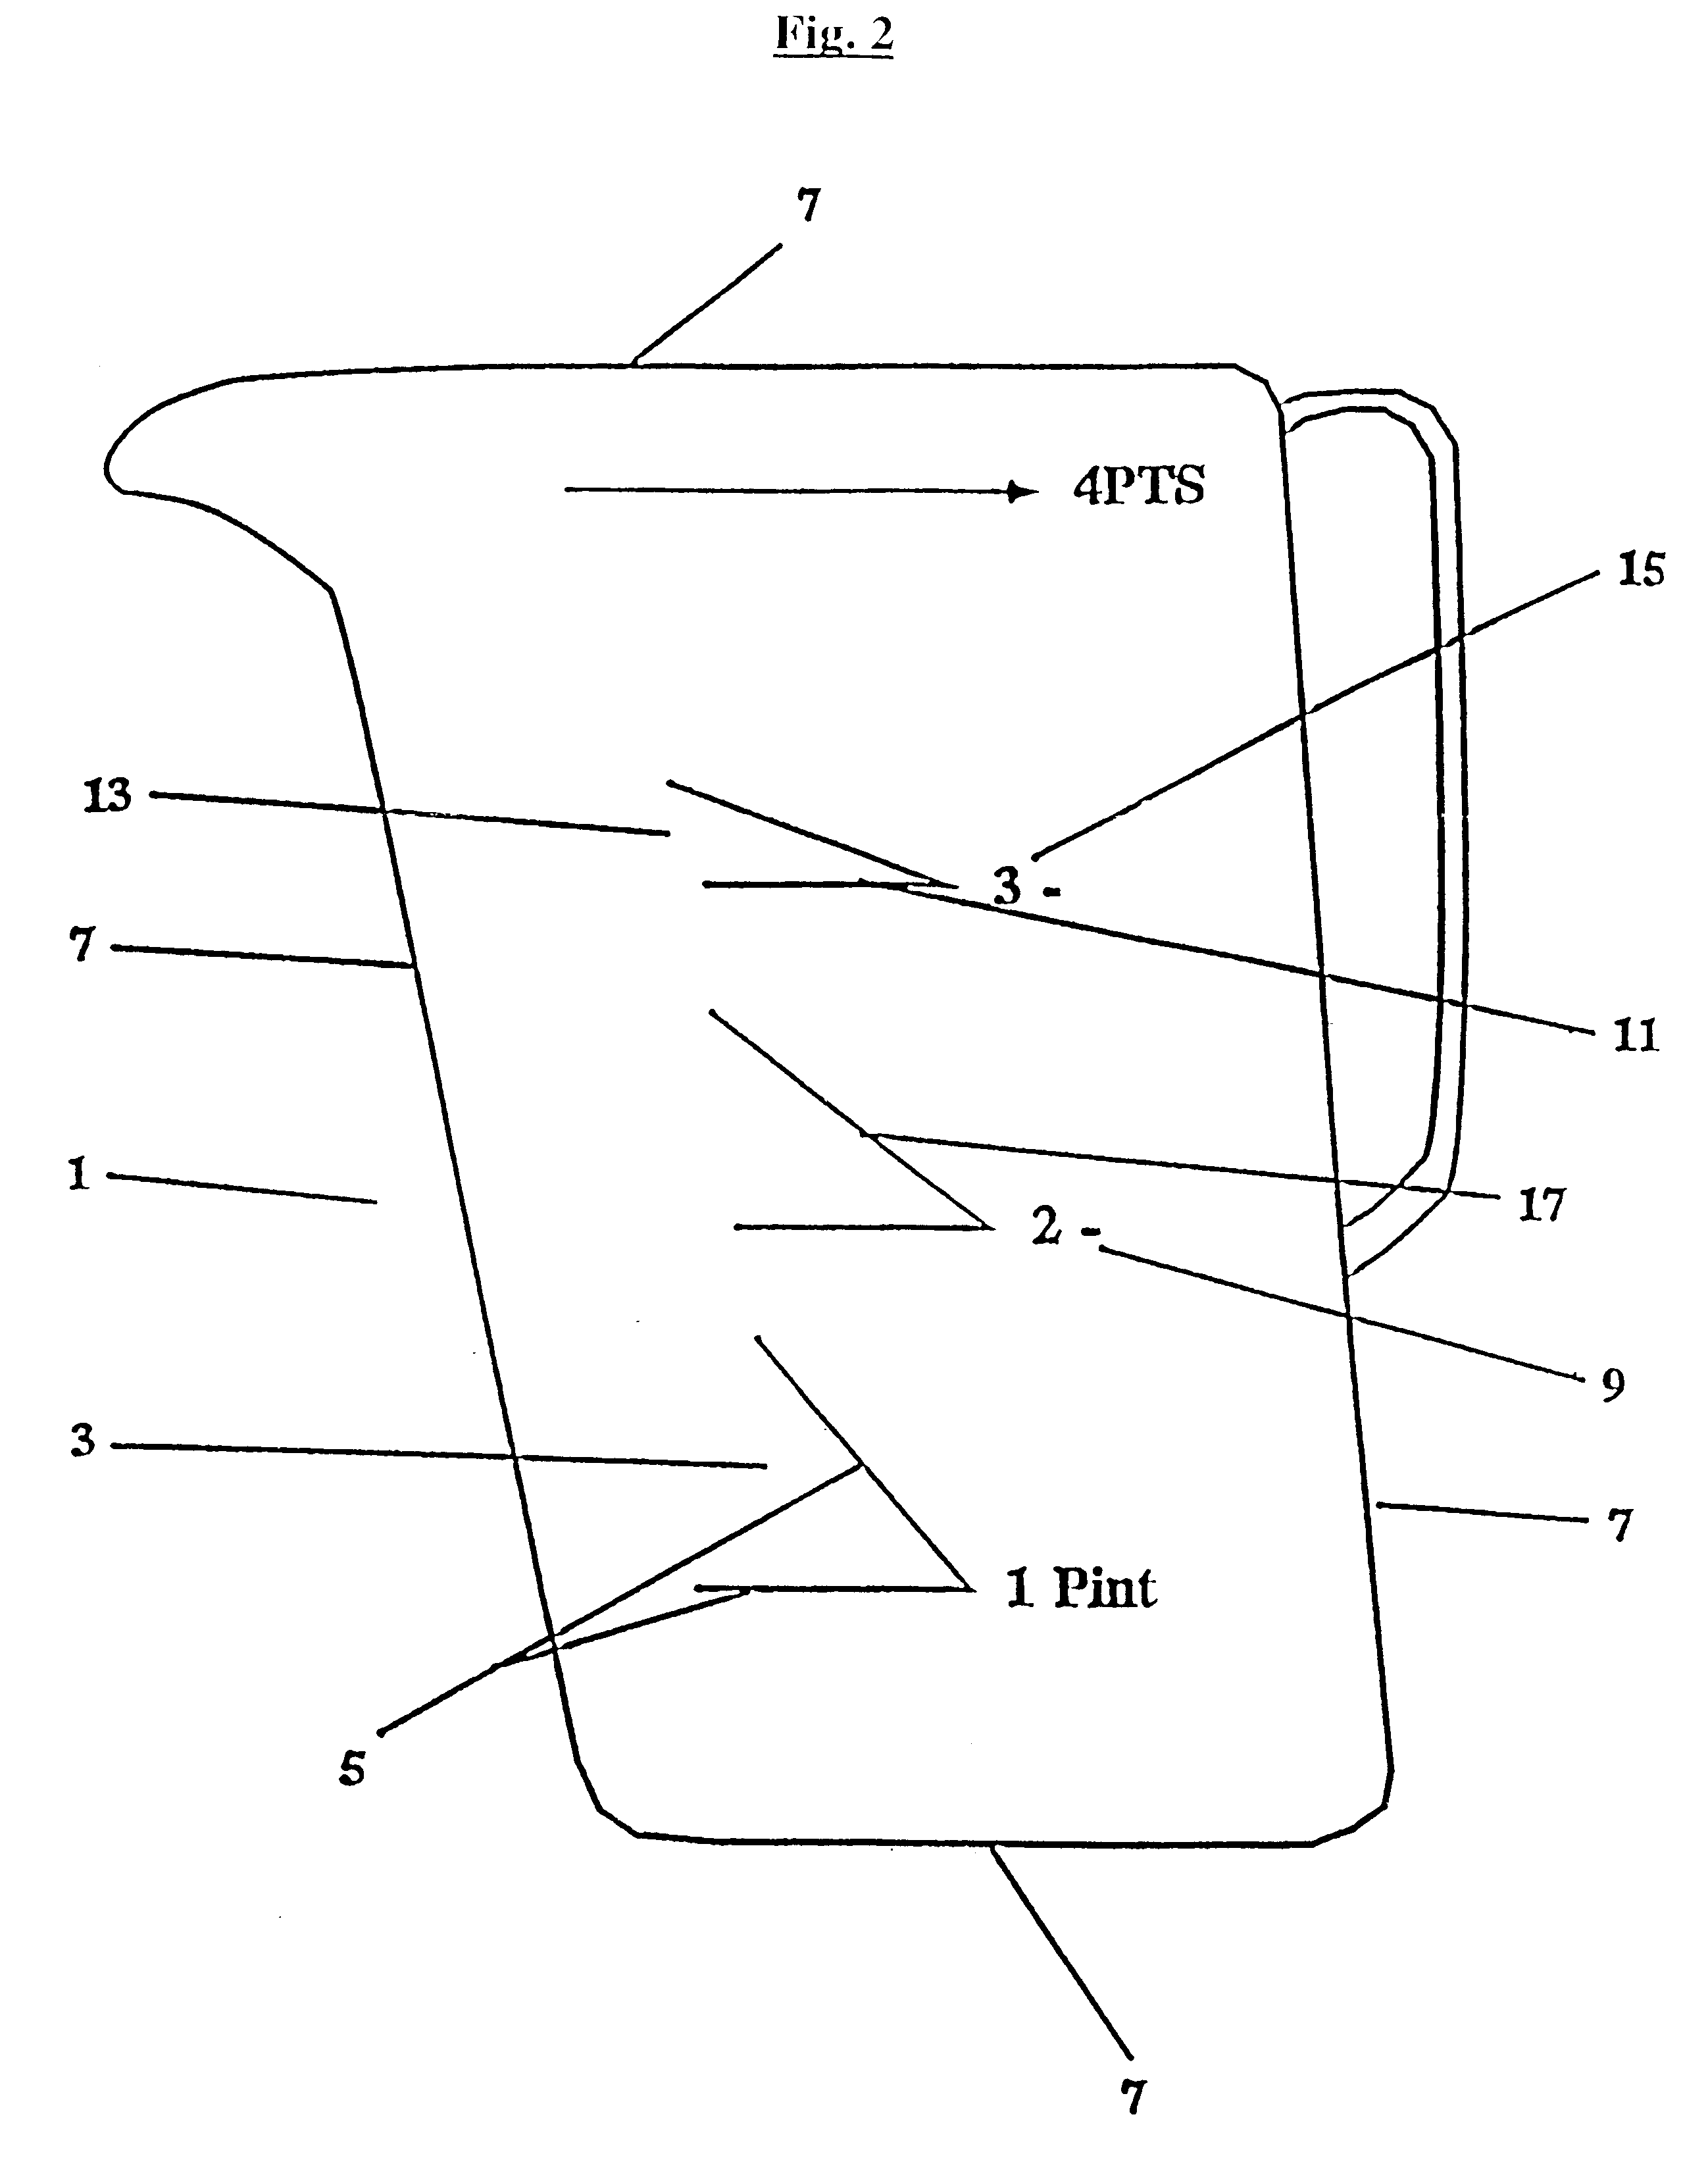 Measuring receptacle having angled lines